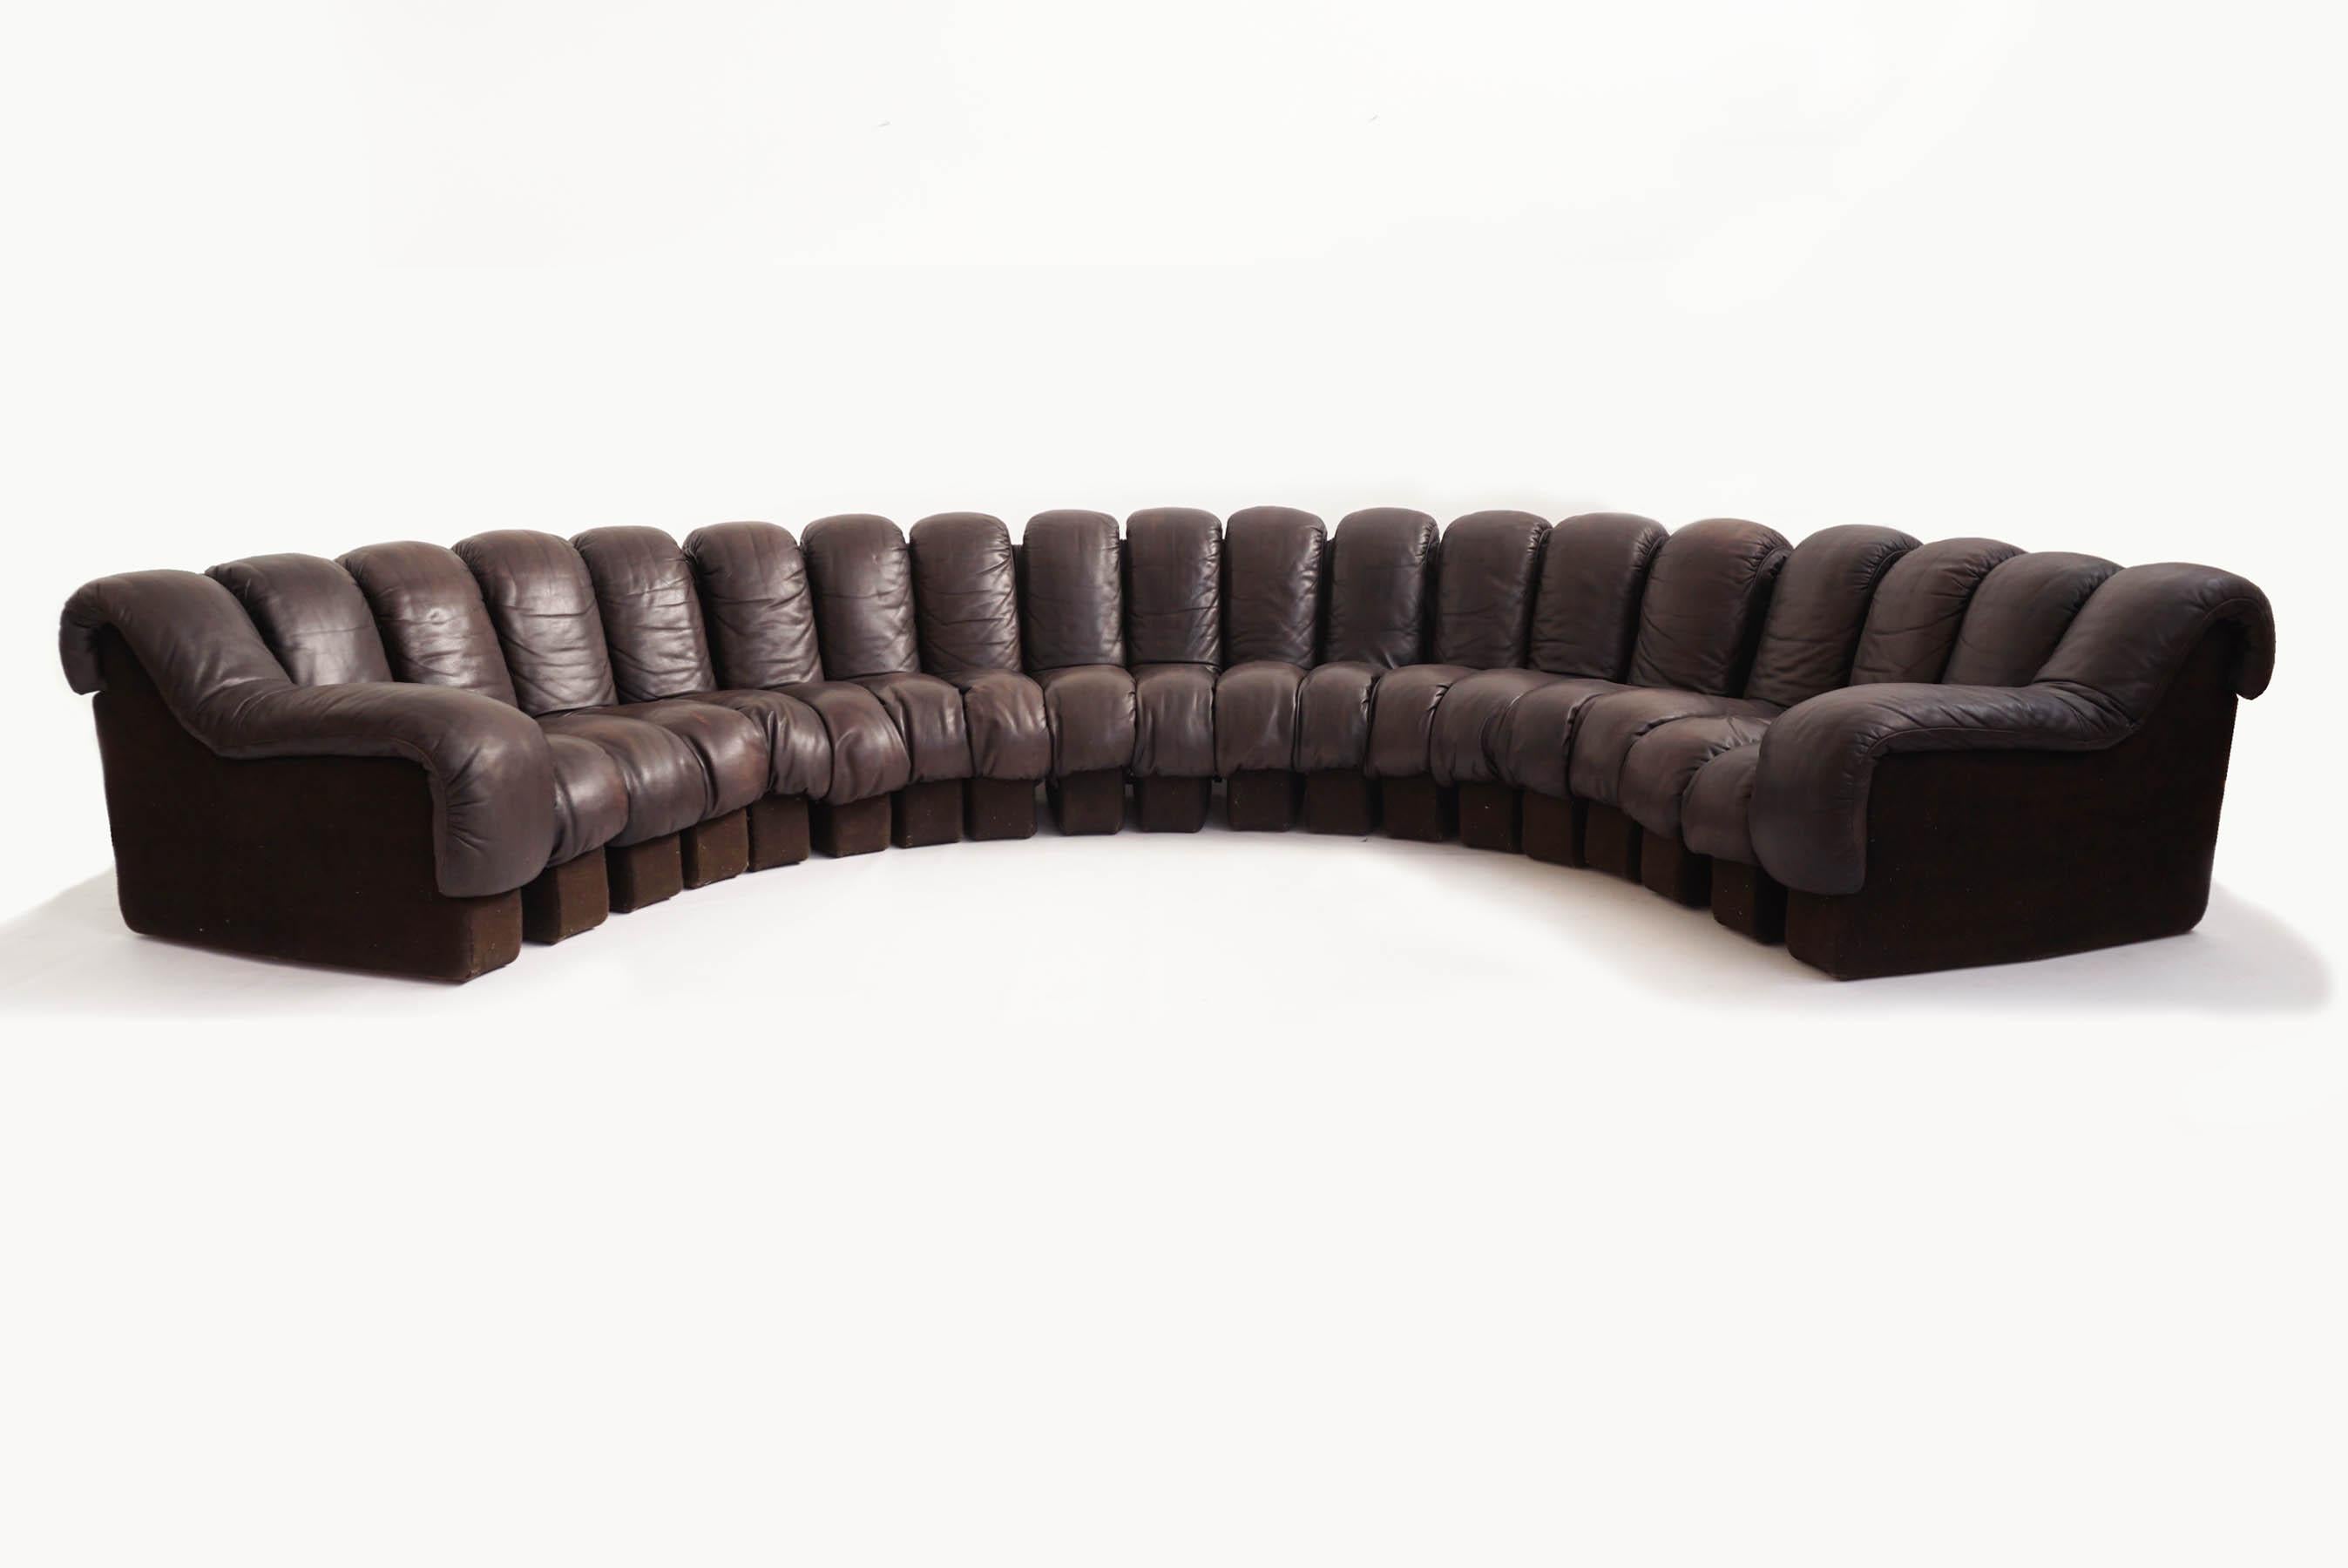 19 Pieces for this super beautiful adjustable in the posizion and size you like organic sofa produced by De Sede, 1970 Switzerland

Deep brown patina leather, wool, 19 modular element.
Each element is 25 x 100 x seating HT. 35 cm
total HT. 70